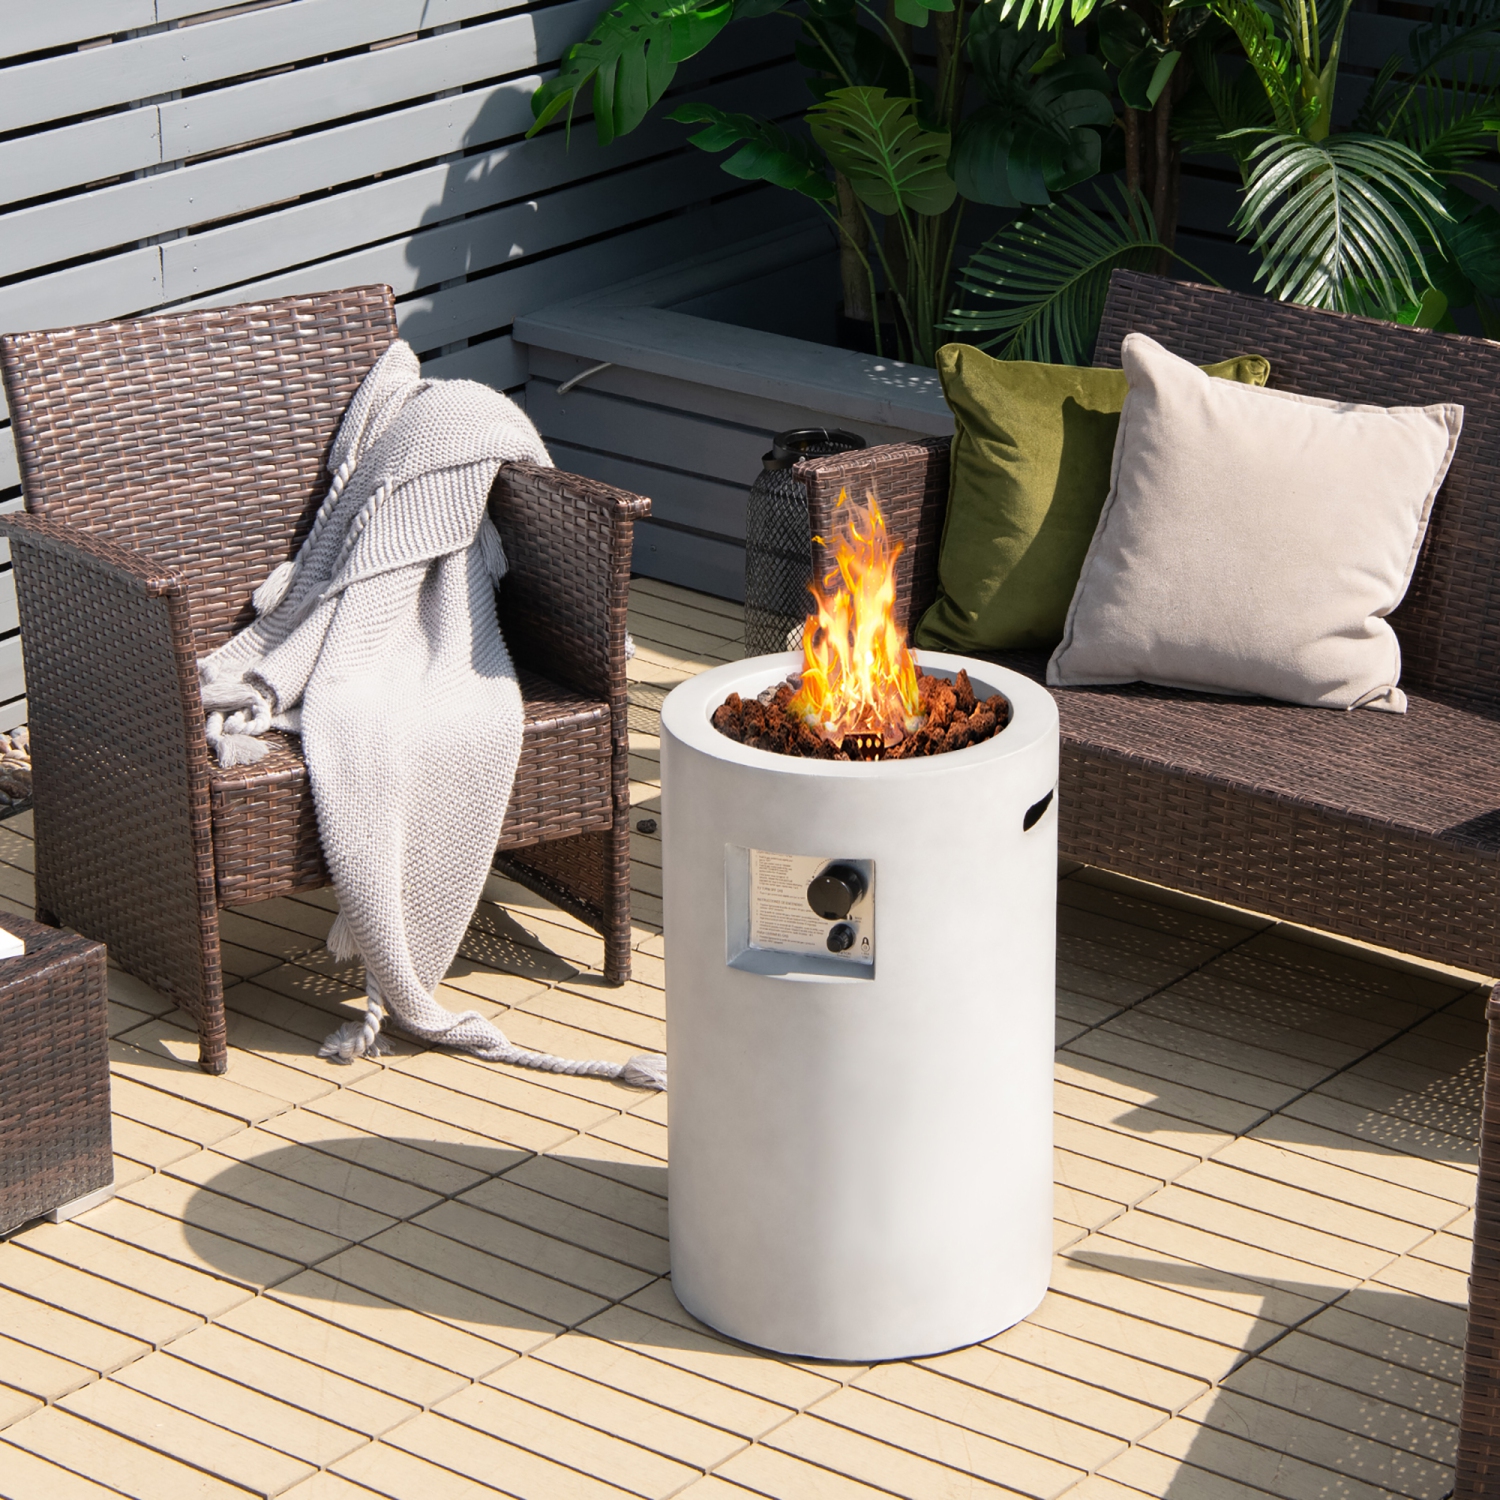 a round fire pit with hidden propane tank storage on a deck surrounded by outdoor furniture with plants in the background